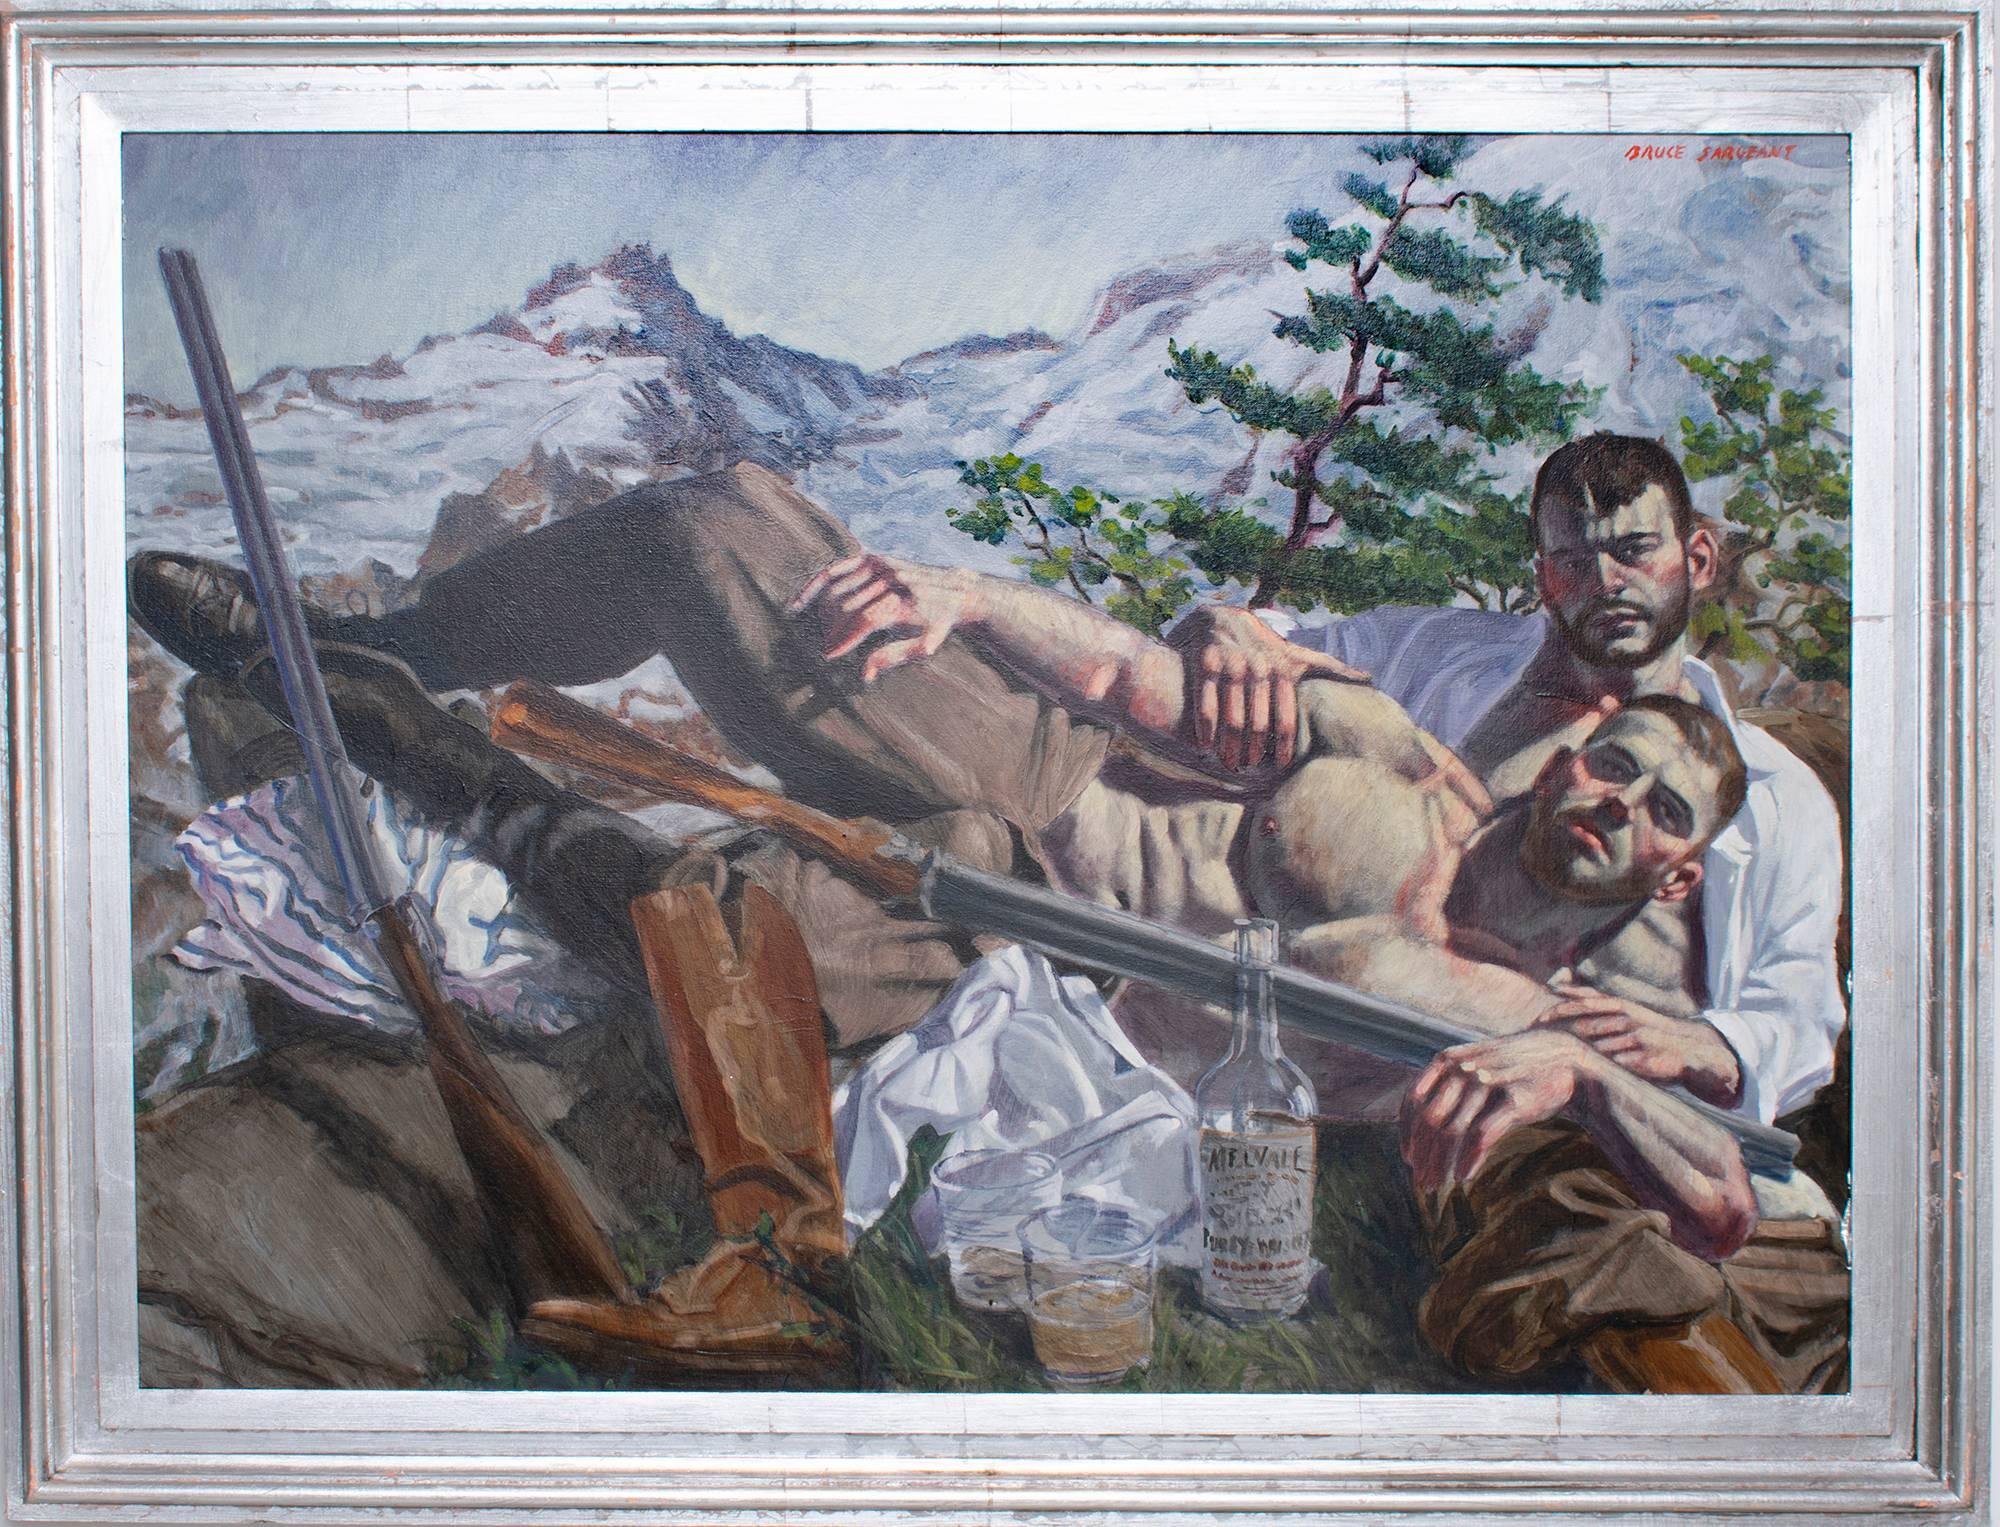 Academic style figurative painting of two men in the mountains.
43 X 57.5 inches in silver leaf wood frame 

Named Déjeuner (French for lunch), this modern figurative painting on canvas of two men in the mountains was painted by Mark Beard under his